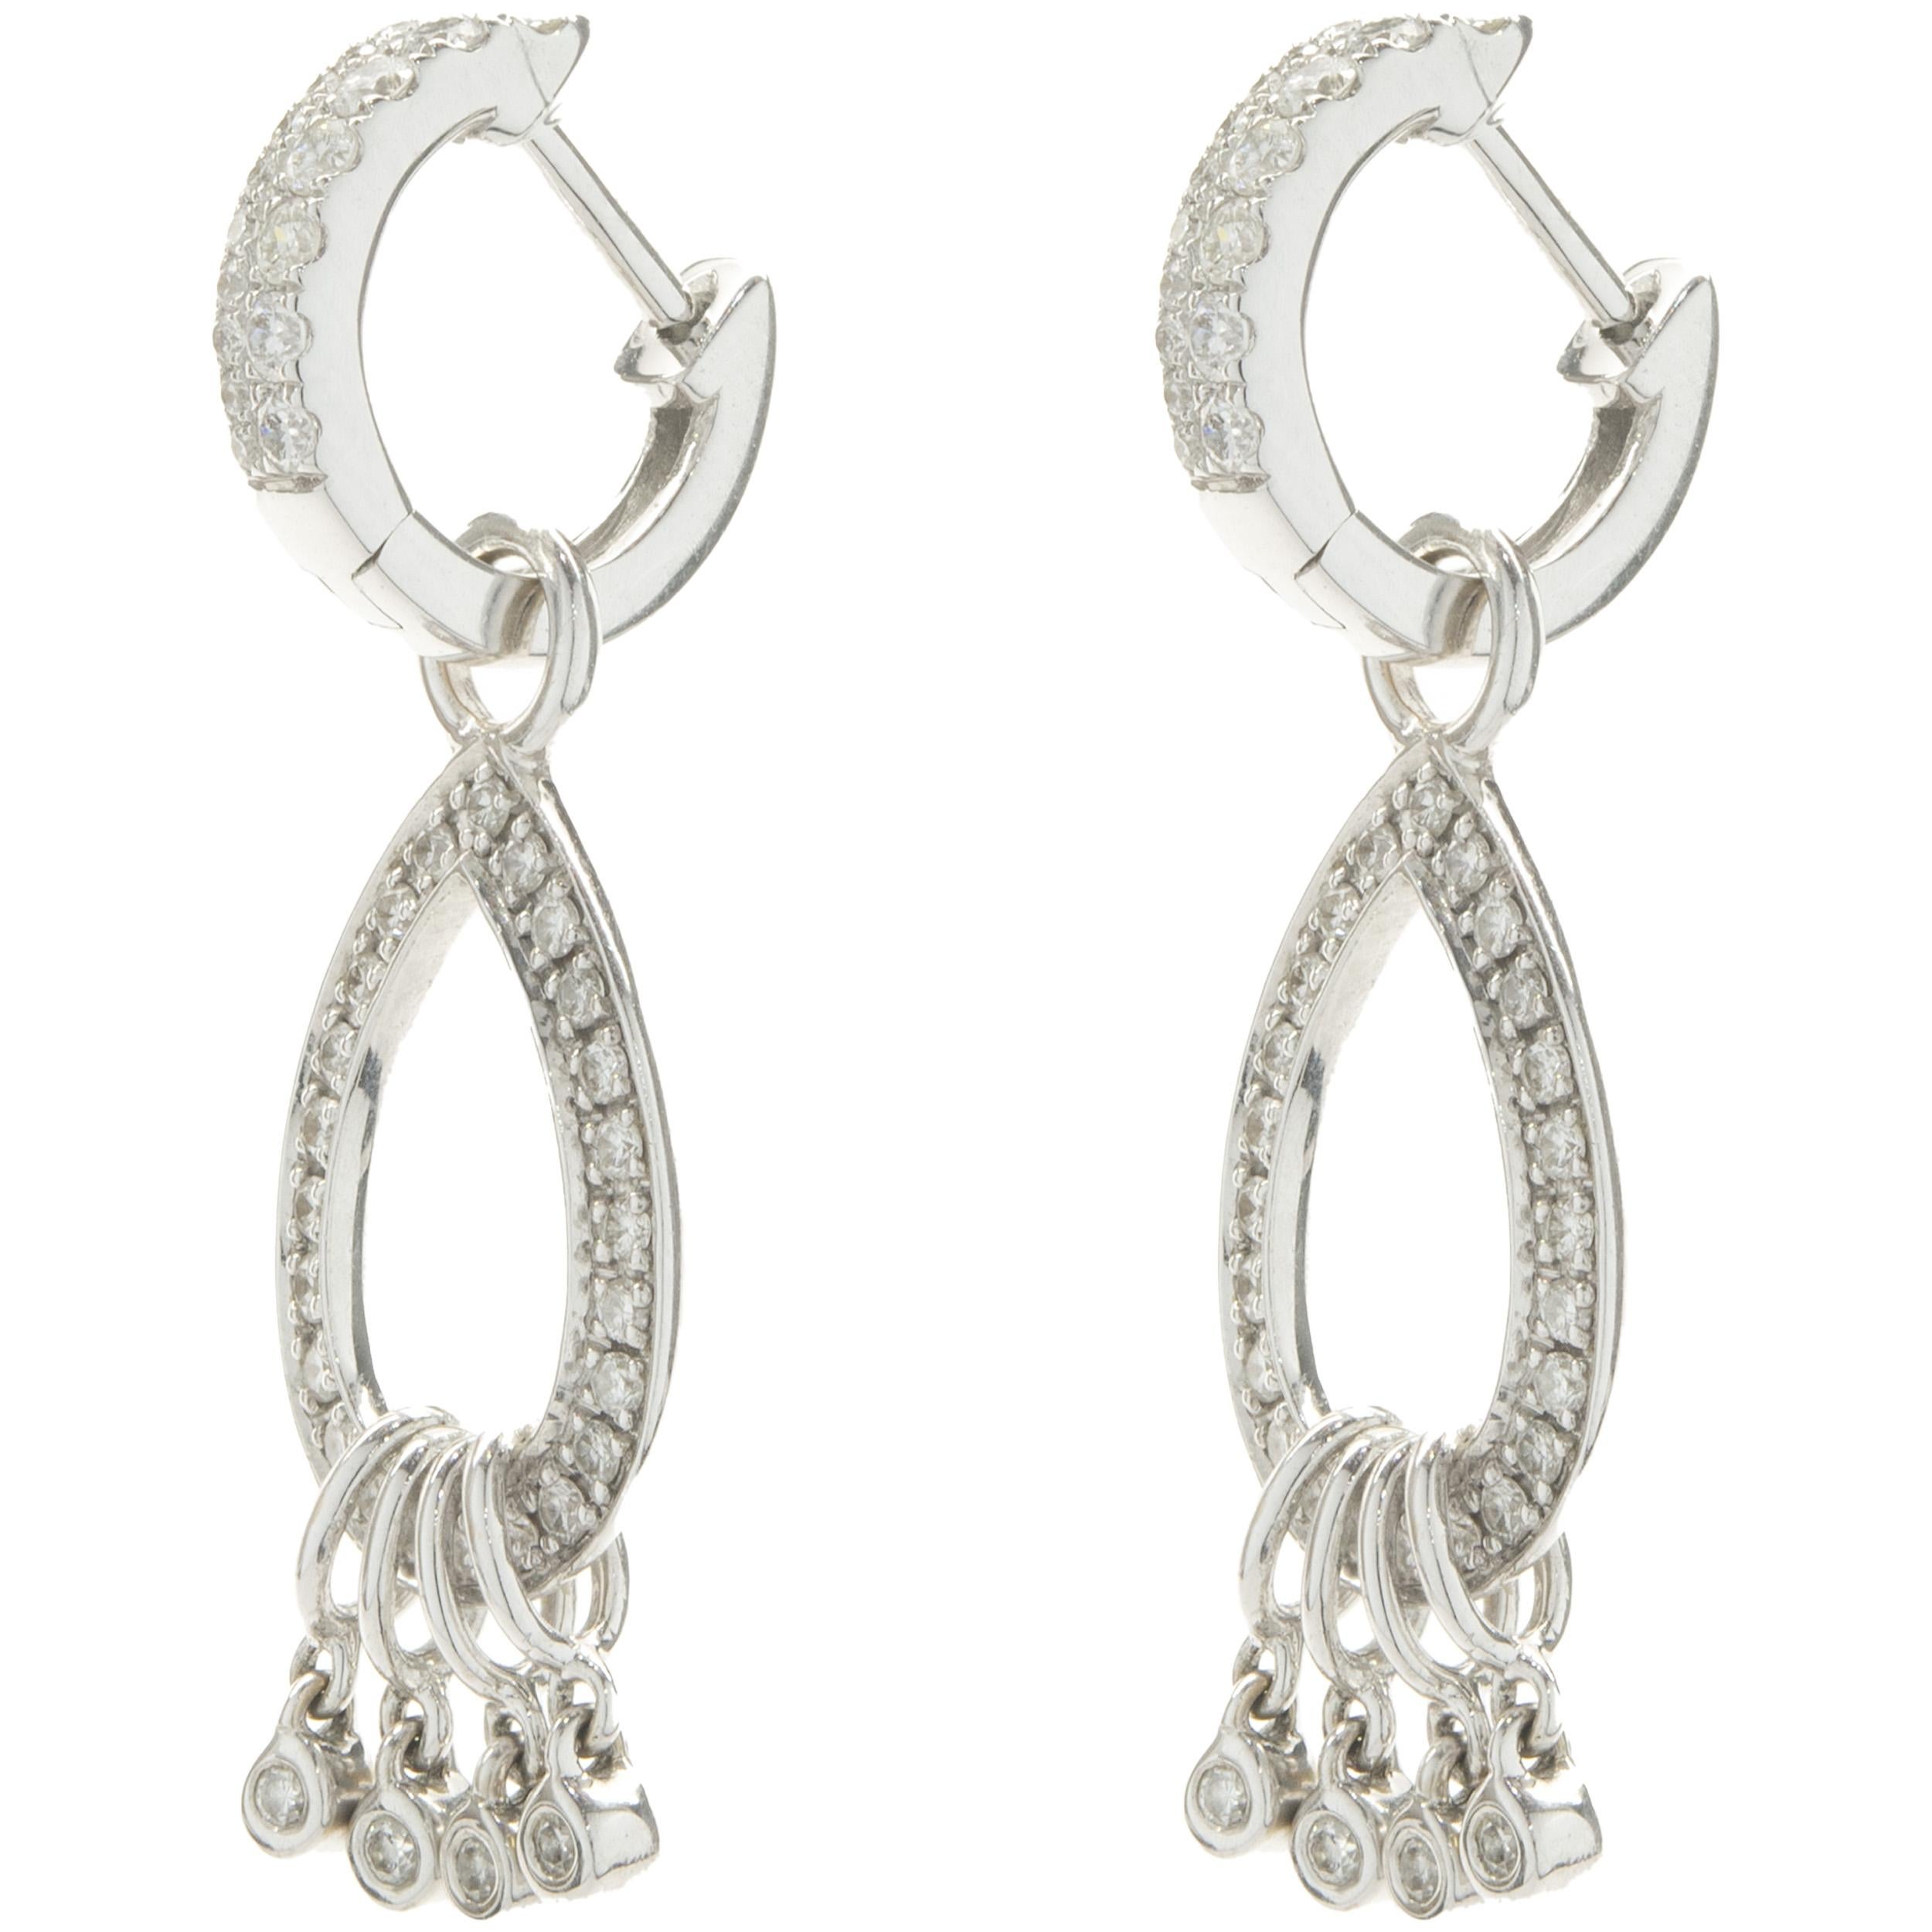 14 Karat White Gold Diamond Drop Earrings In Excellent Condition For Sale In Scottsdale, AZ